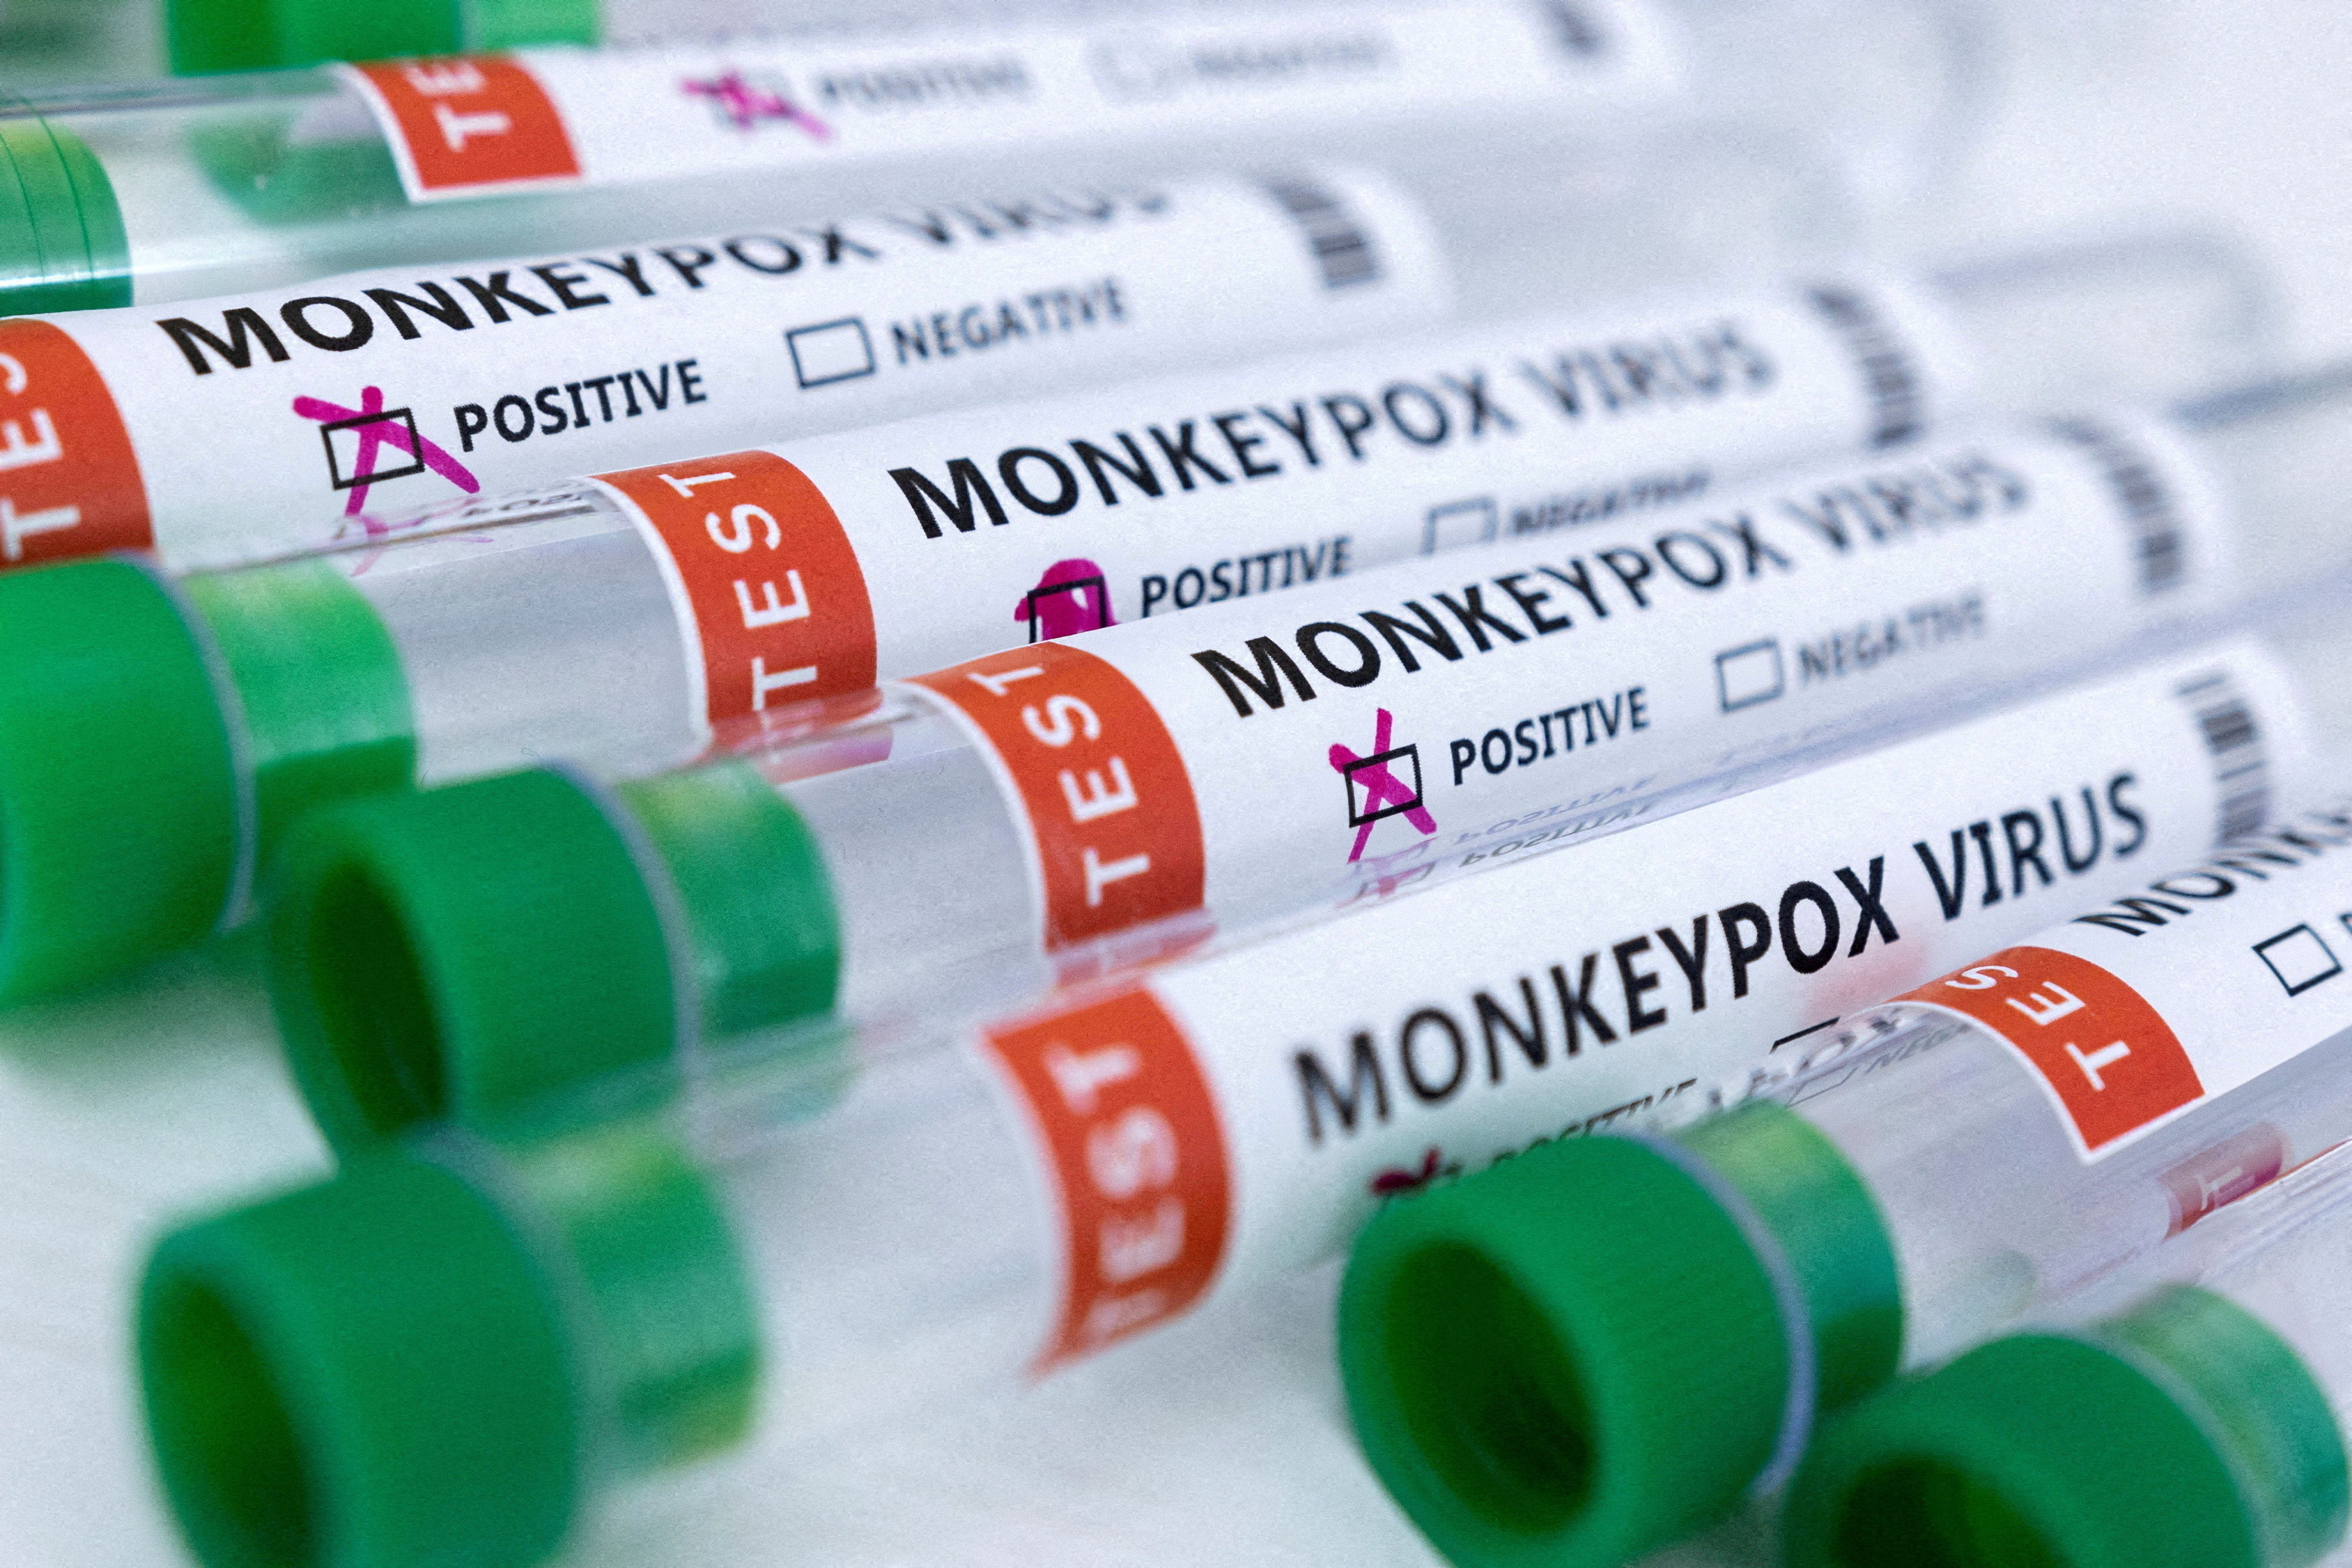 Monkeypox Infections : A Study reveals safety, efficacy of tecovirimat in treating monkeypox.